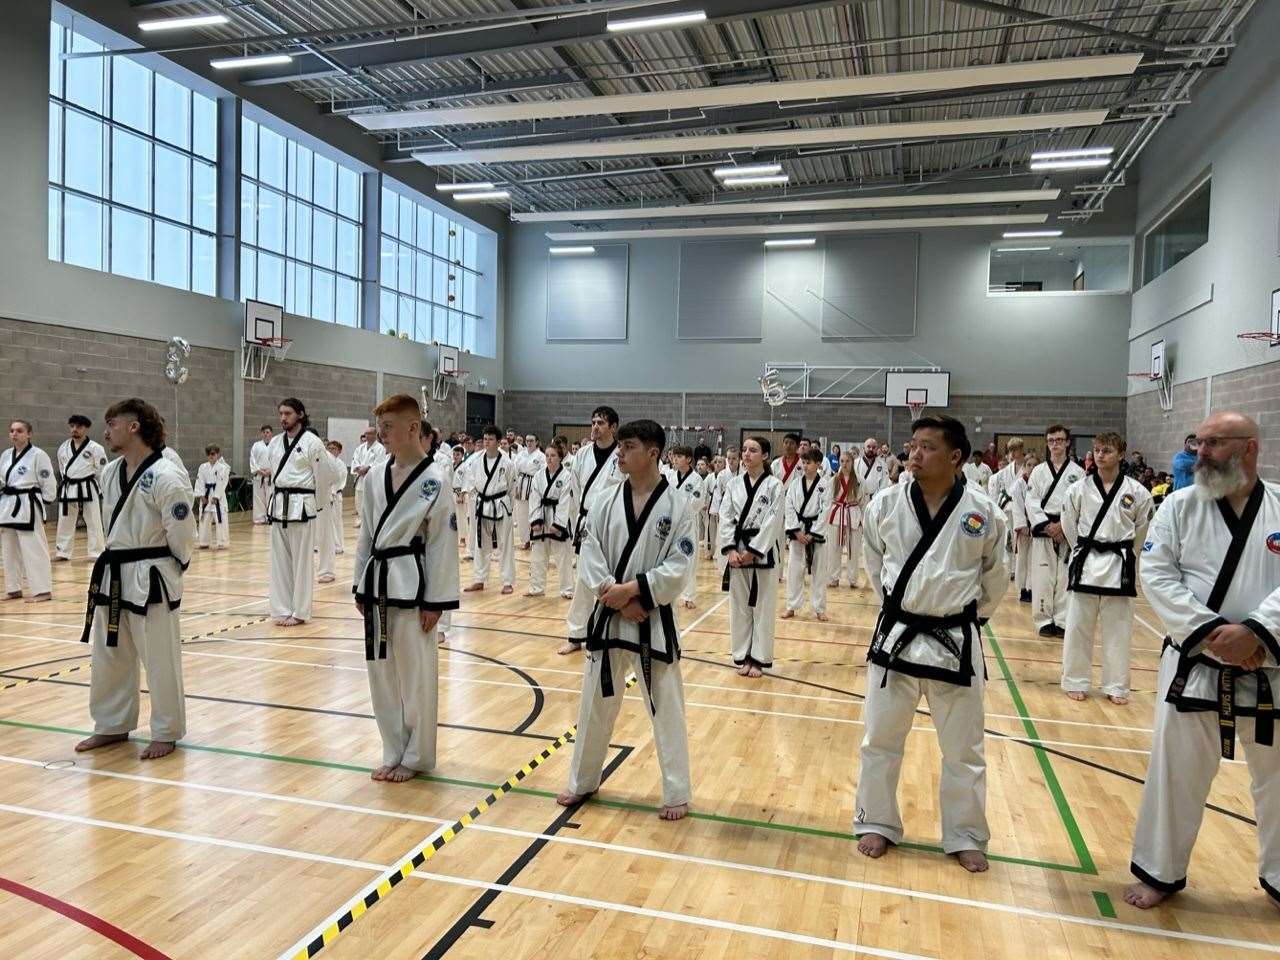 The competitors line up in Lossiemouth before the championships